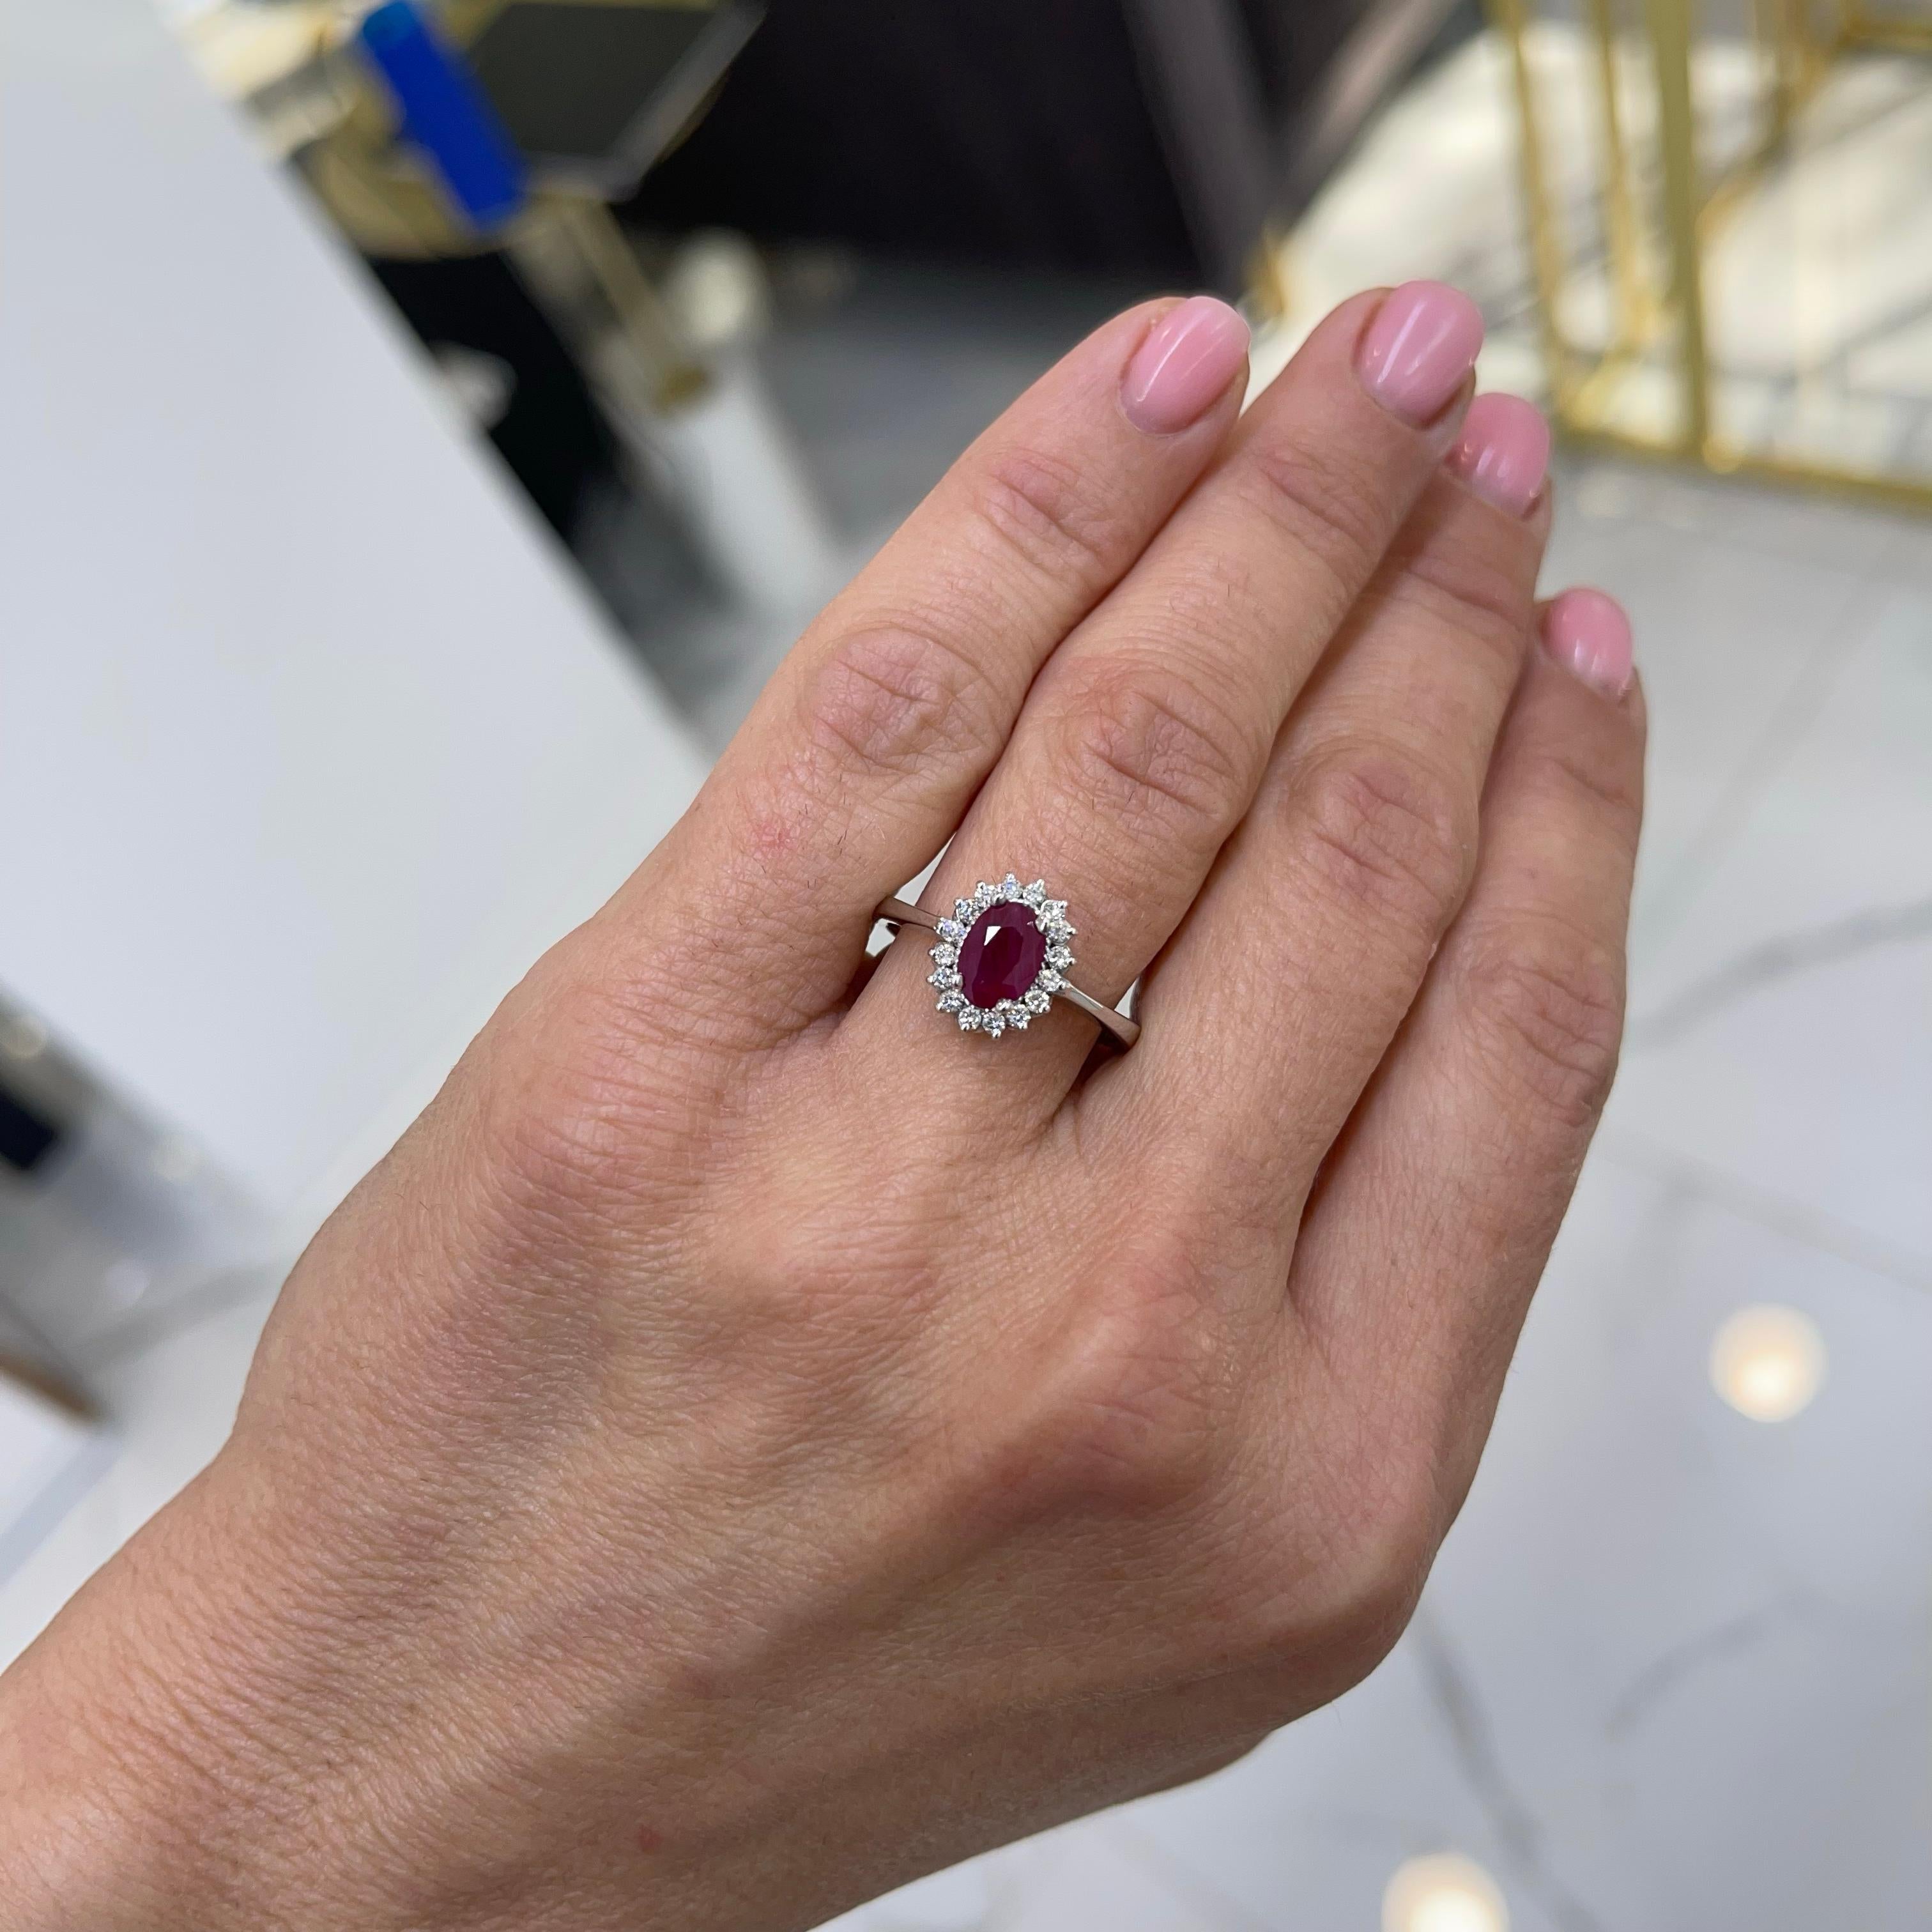 Ladies14k White Gold Oval Ruby Halo Diamond Cocktail Ring For Sale 3